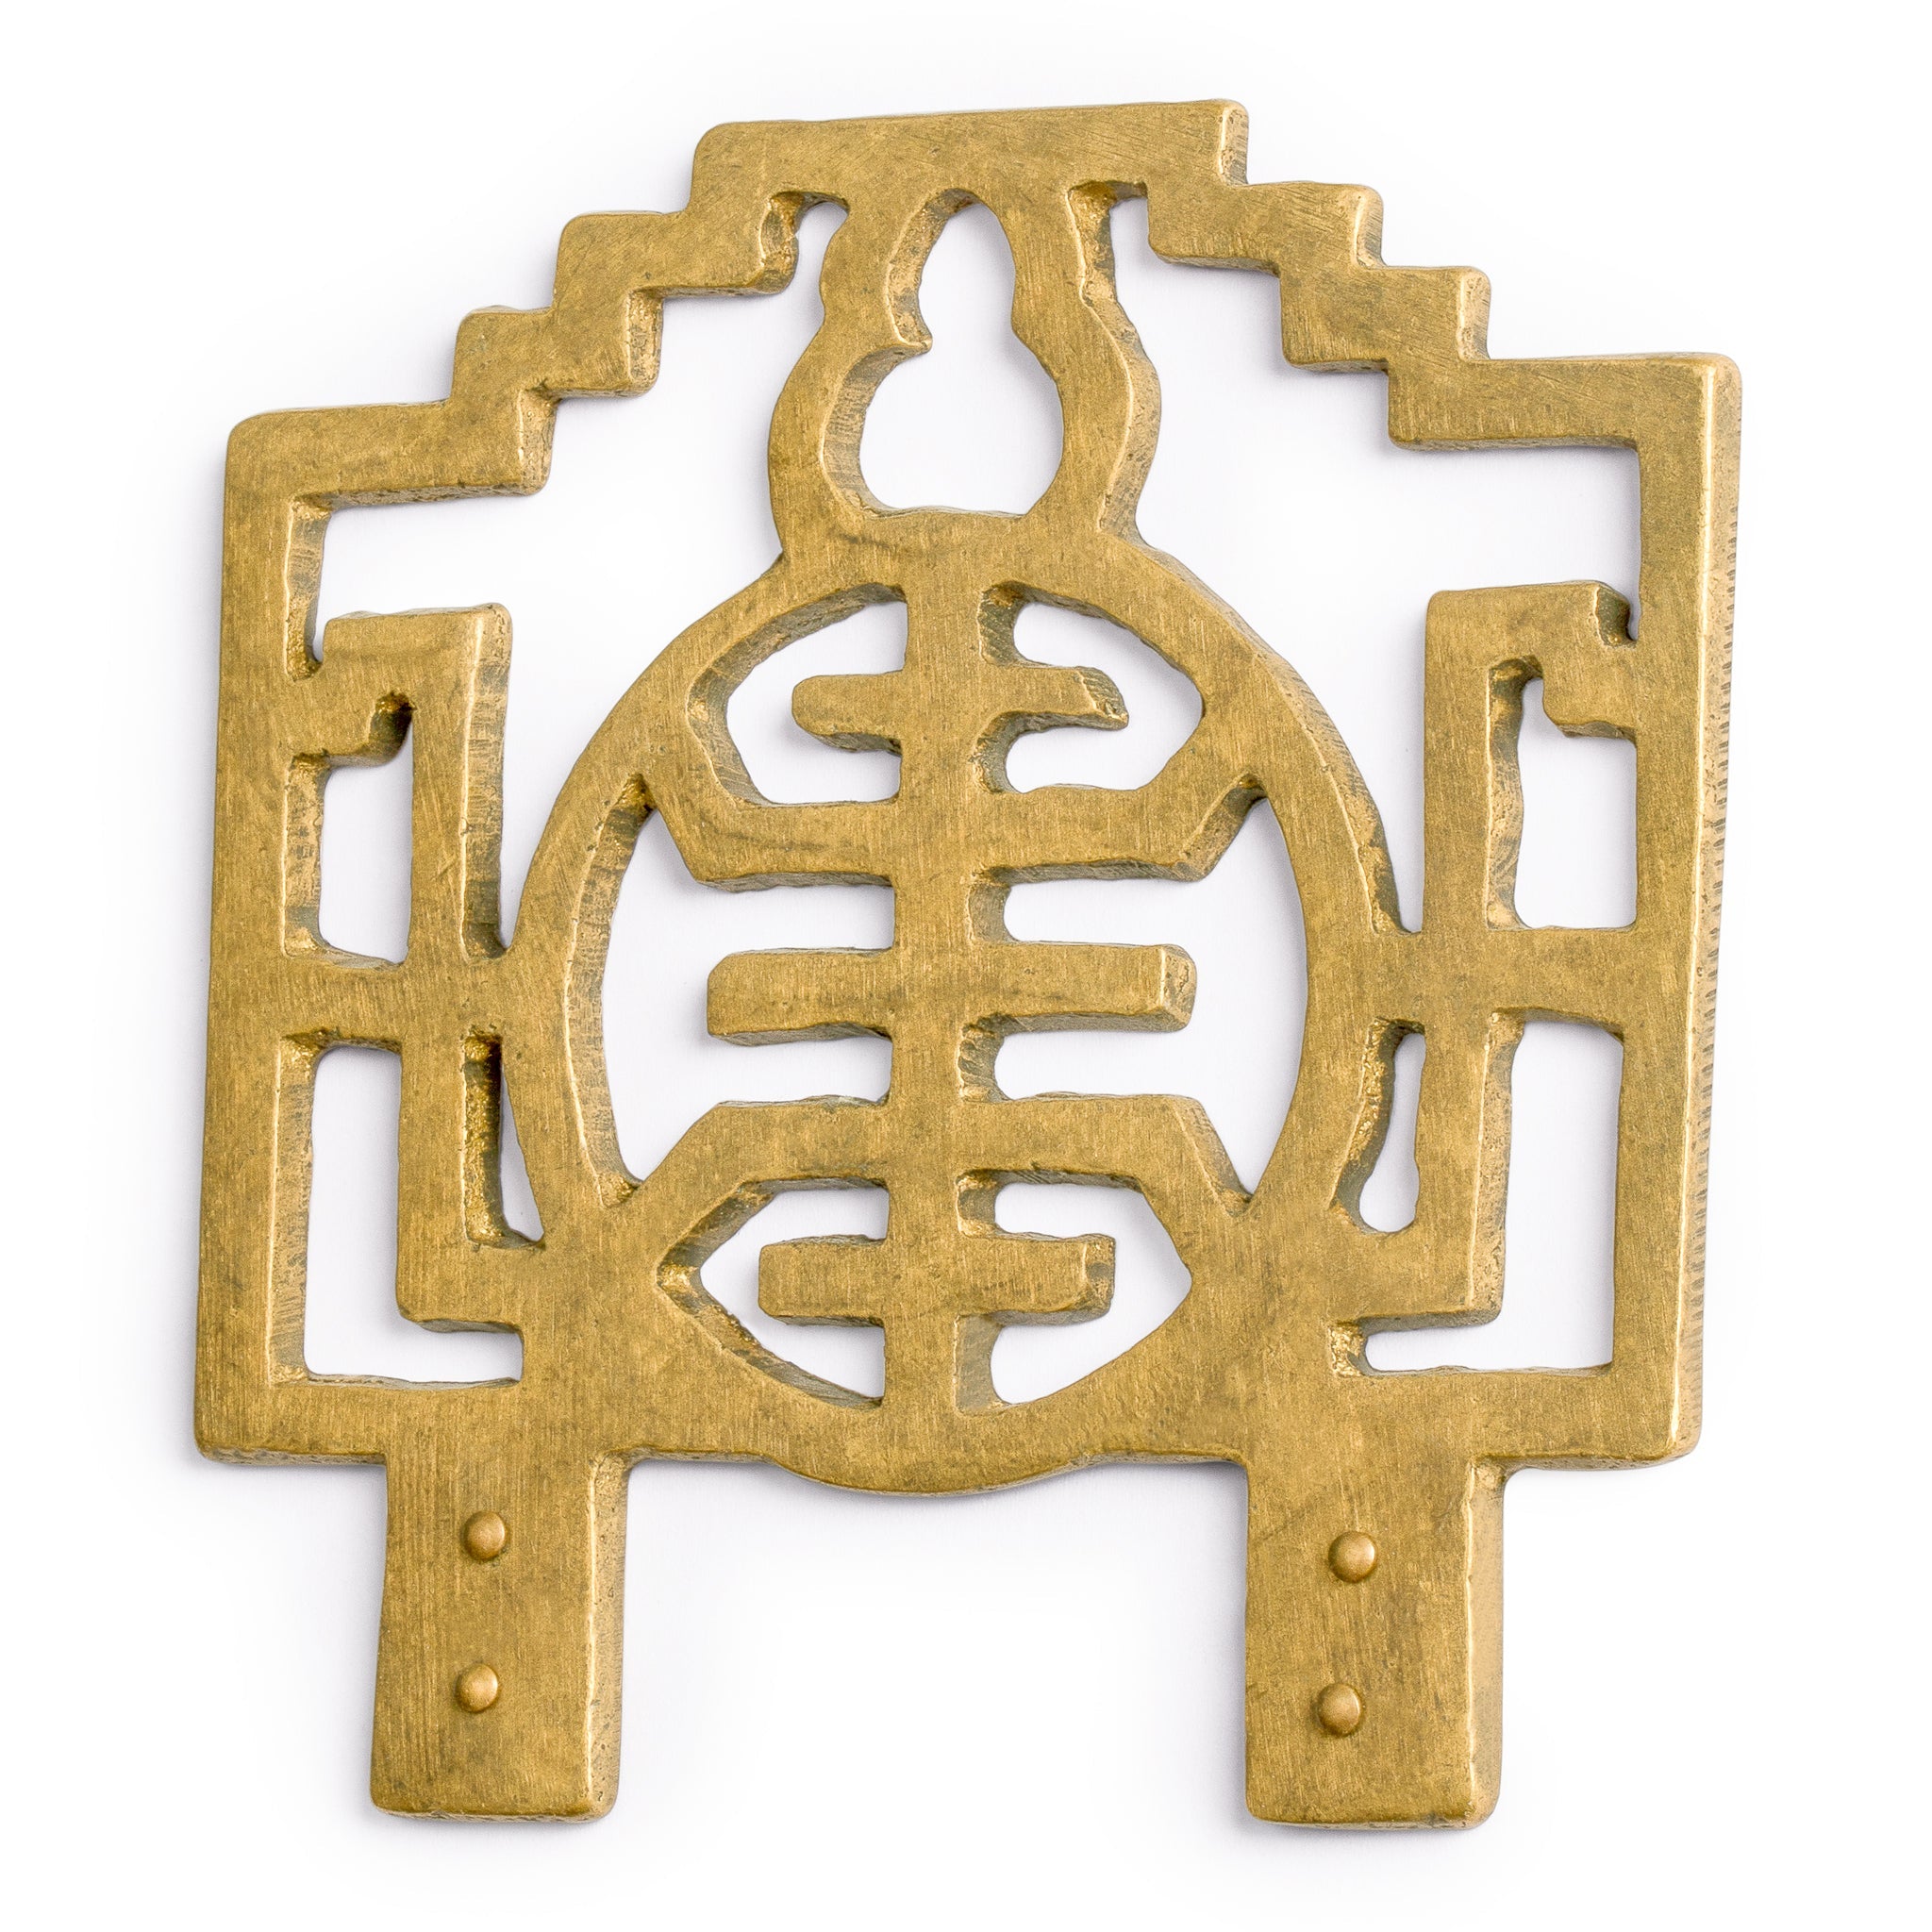 Old China Style Picture Hook Hanger 4 x 4" - Set of 1-Chinese Brass Hardware